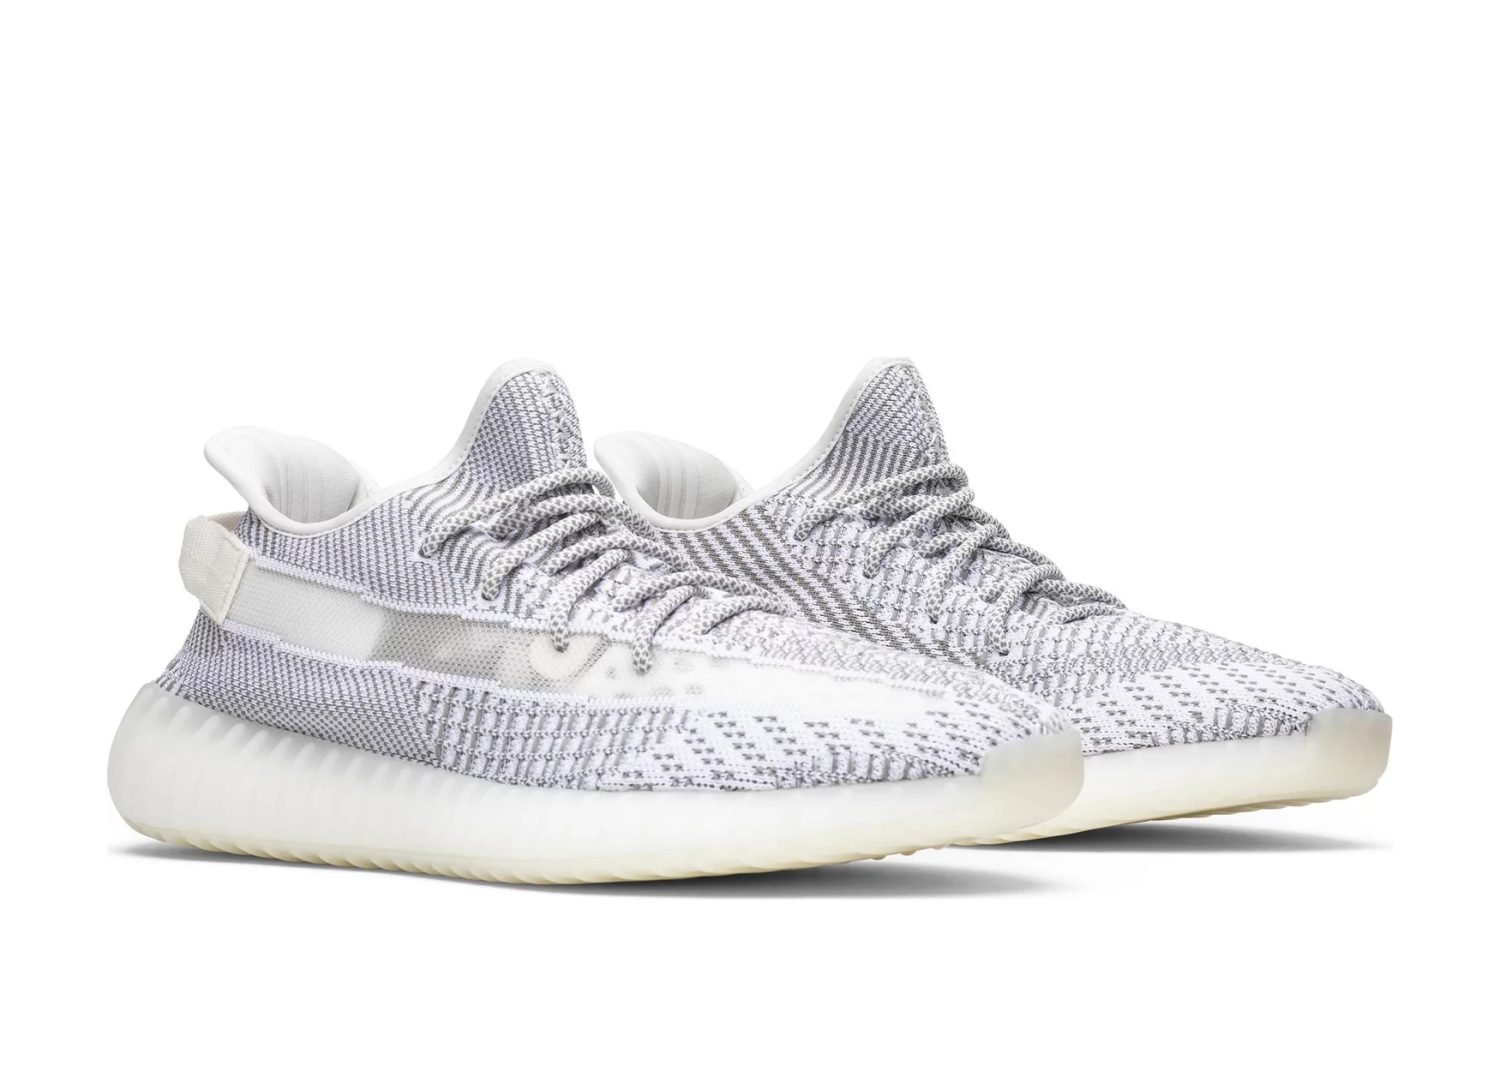 adidas yeezy boost 350 v2 static (non reflective)5